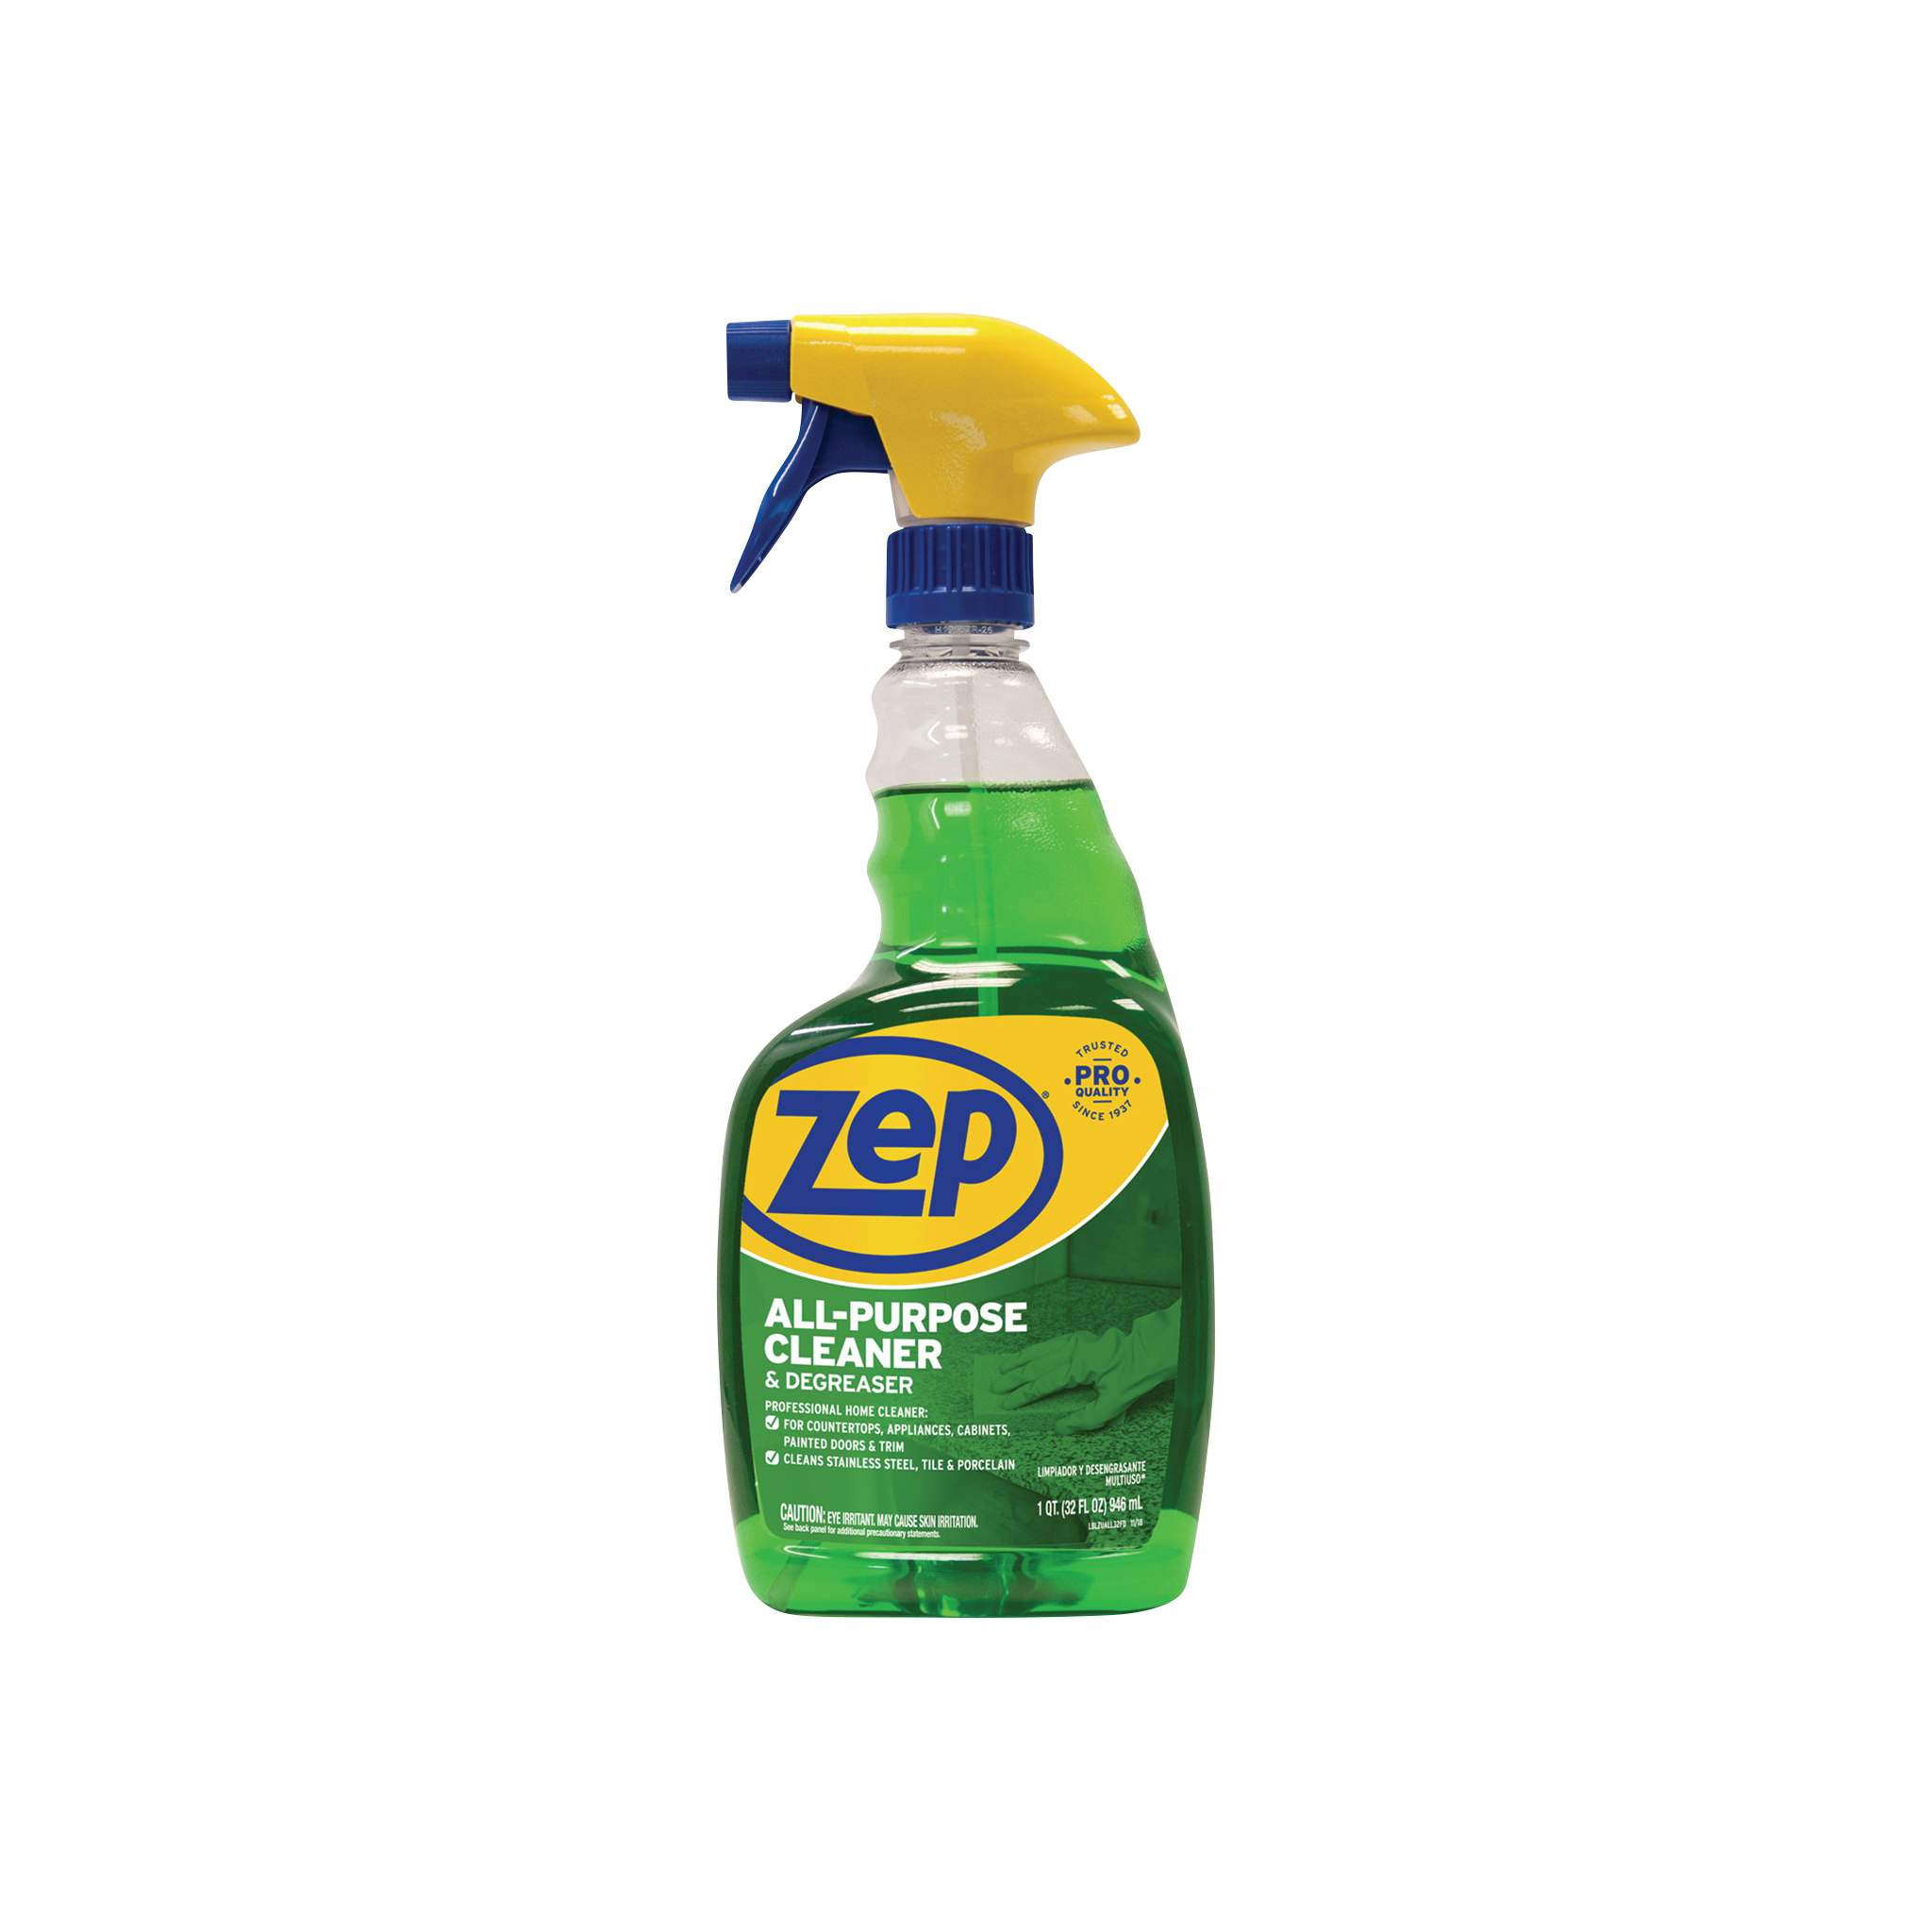 Zep All-Purpose Cleaner + Degreaser Spray - 32oz